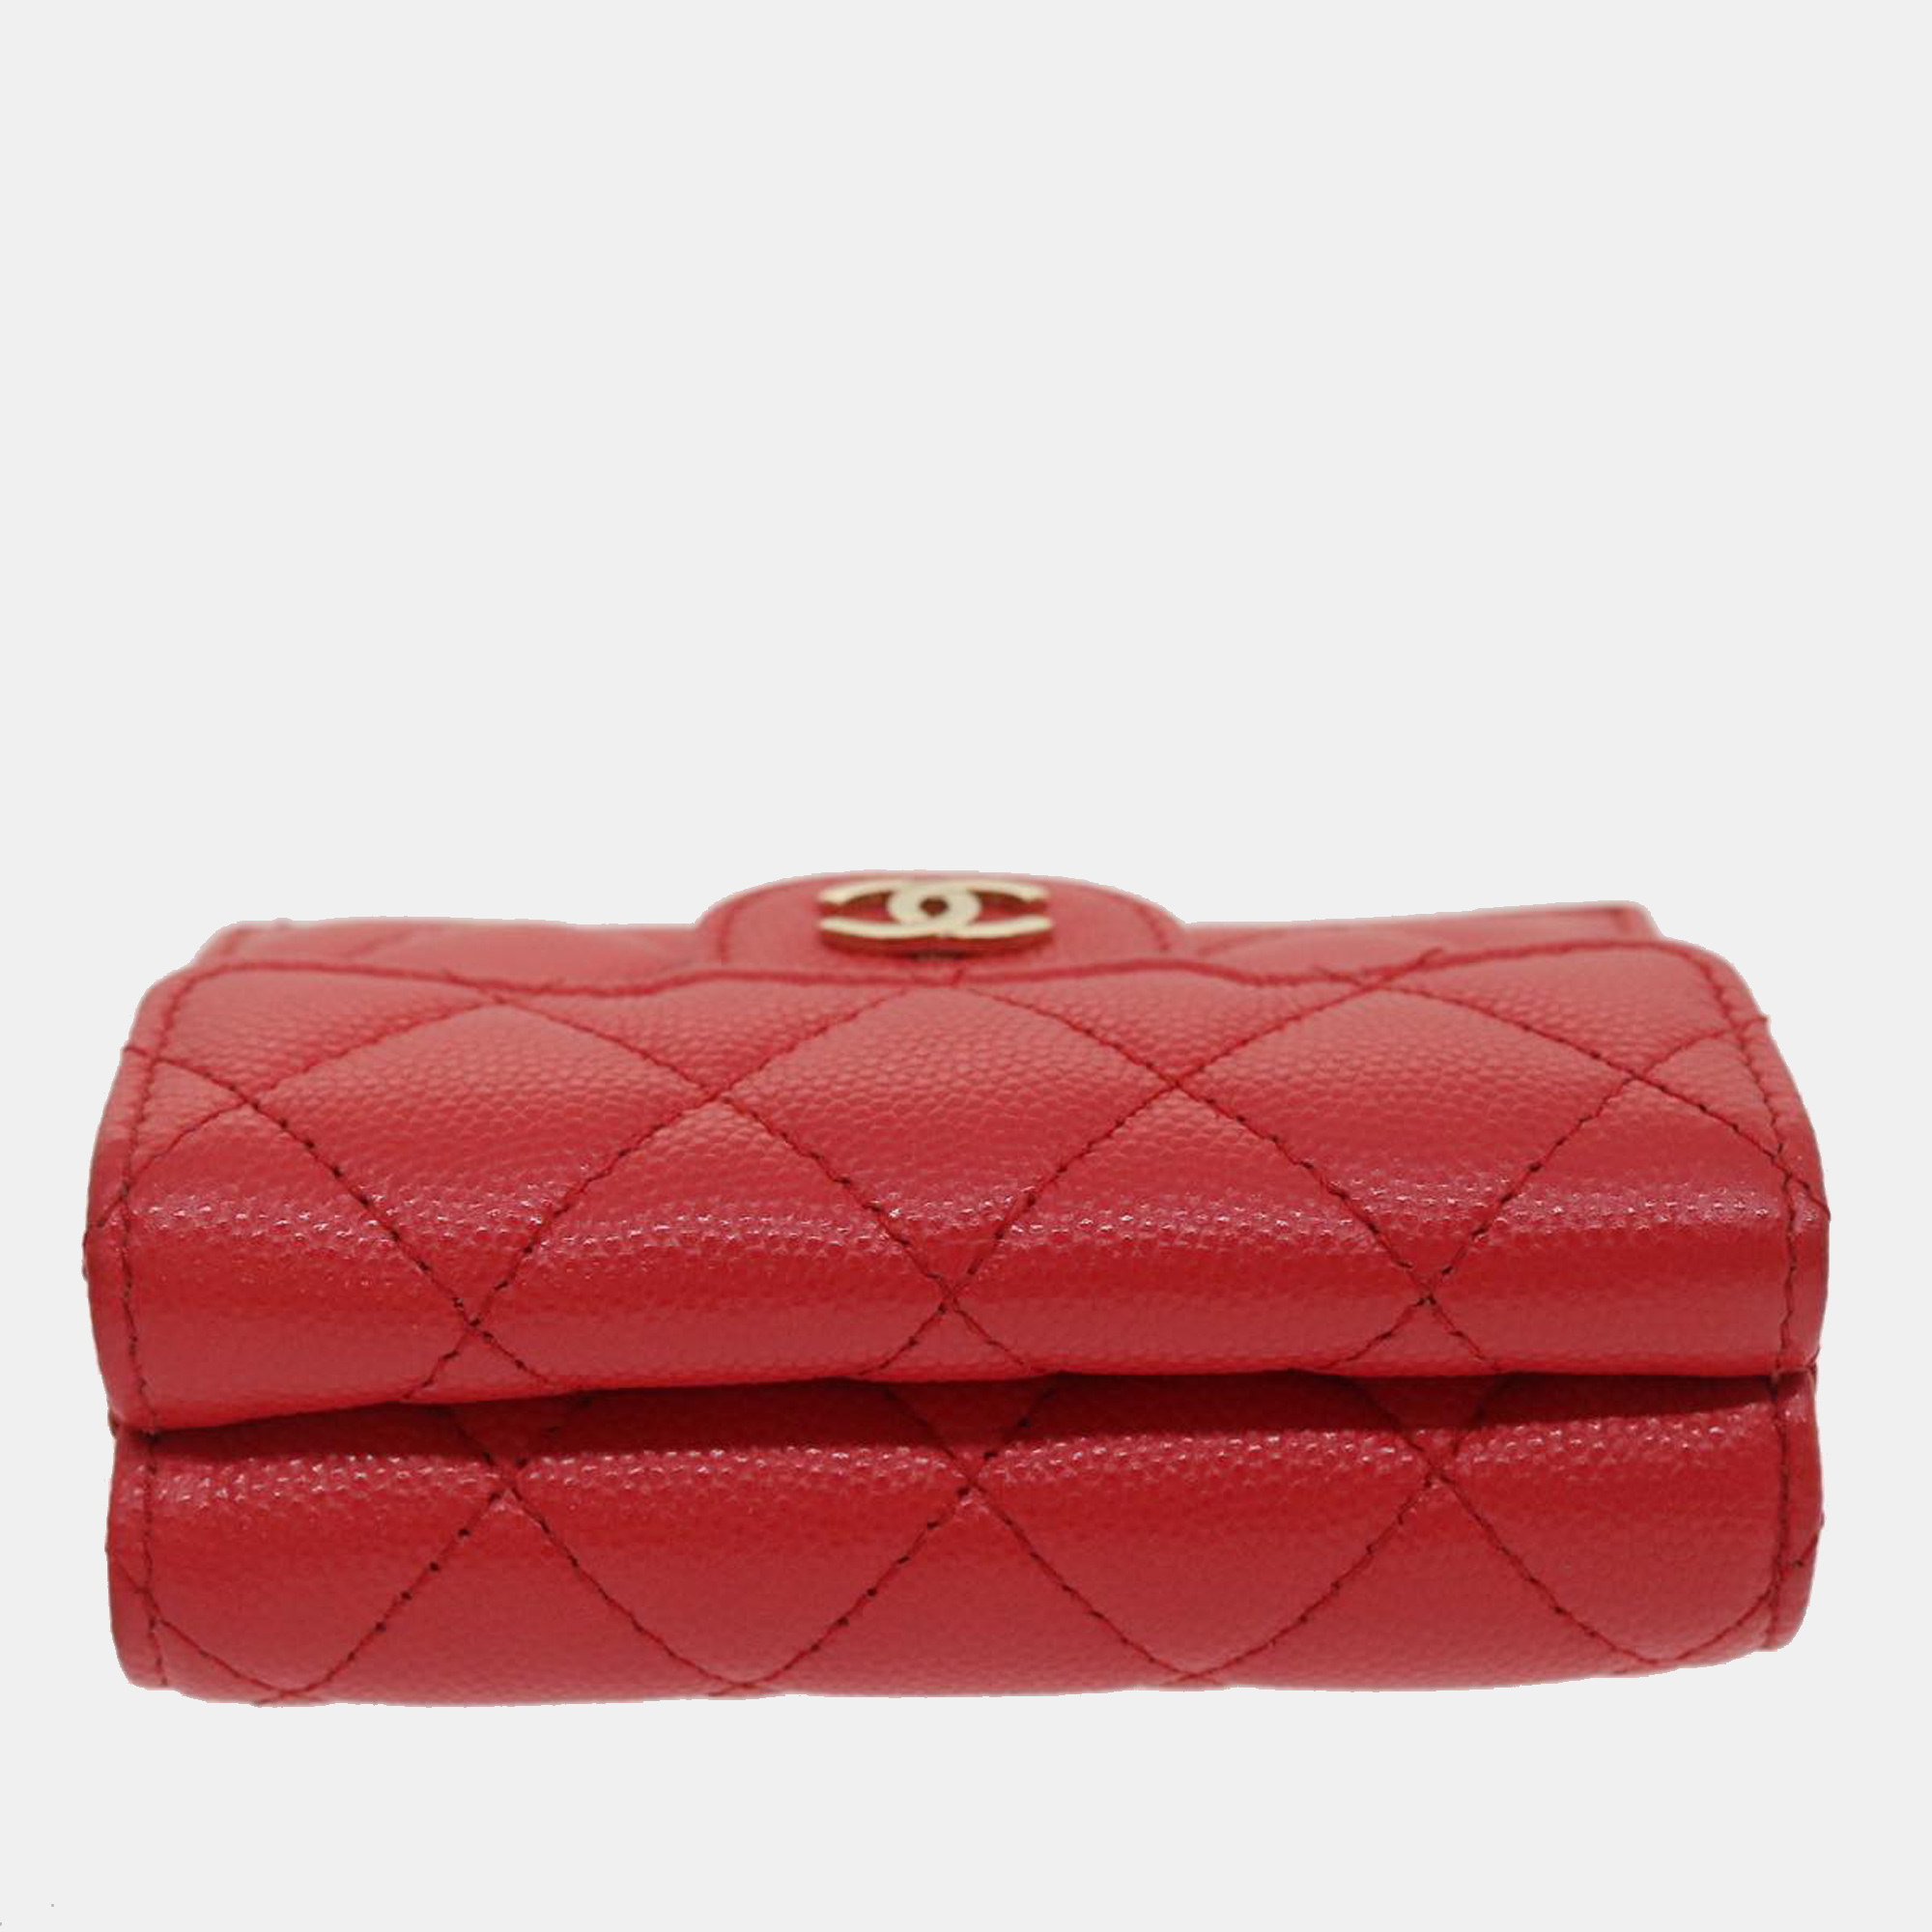 Chanel Red Leather CC Wallet